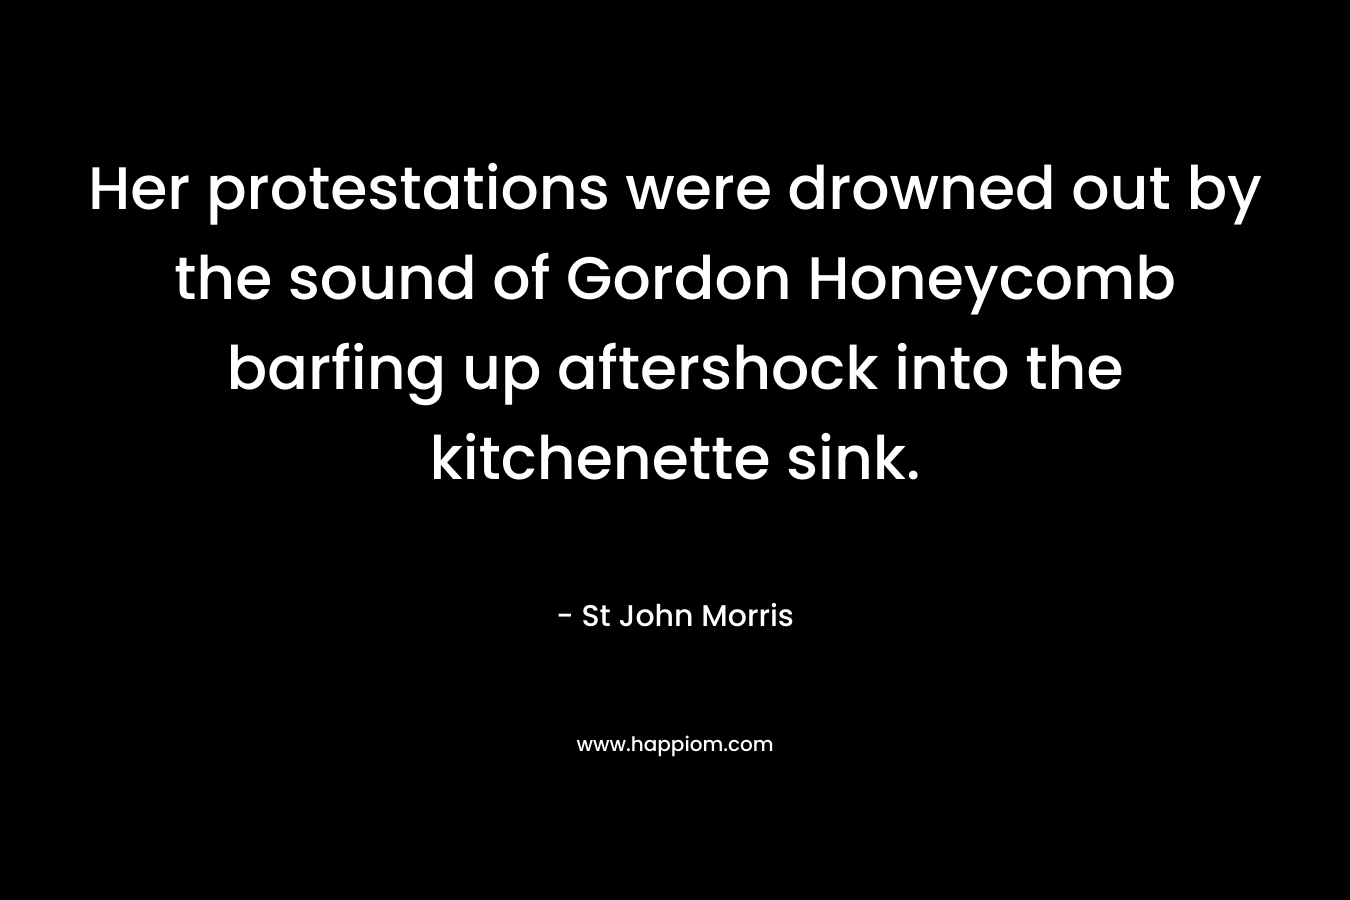 Her protestations were drowned out by the sound of Gordon Honeycomb barfing up aftershock into the kitchenette sink.